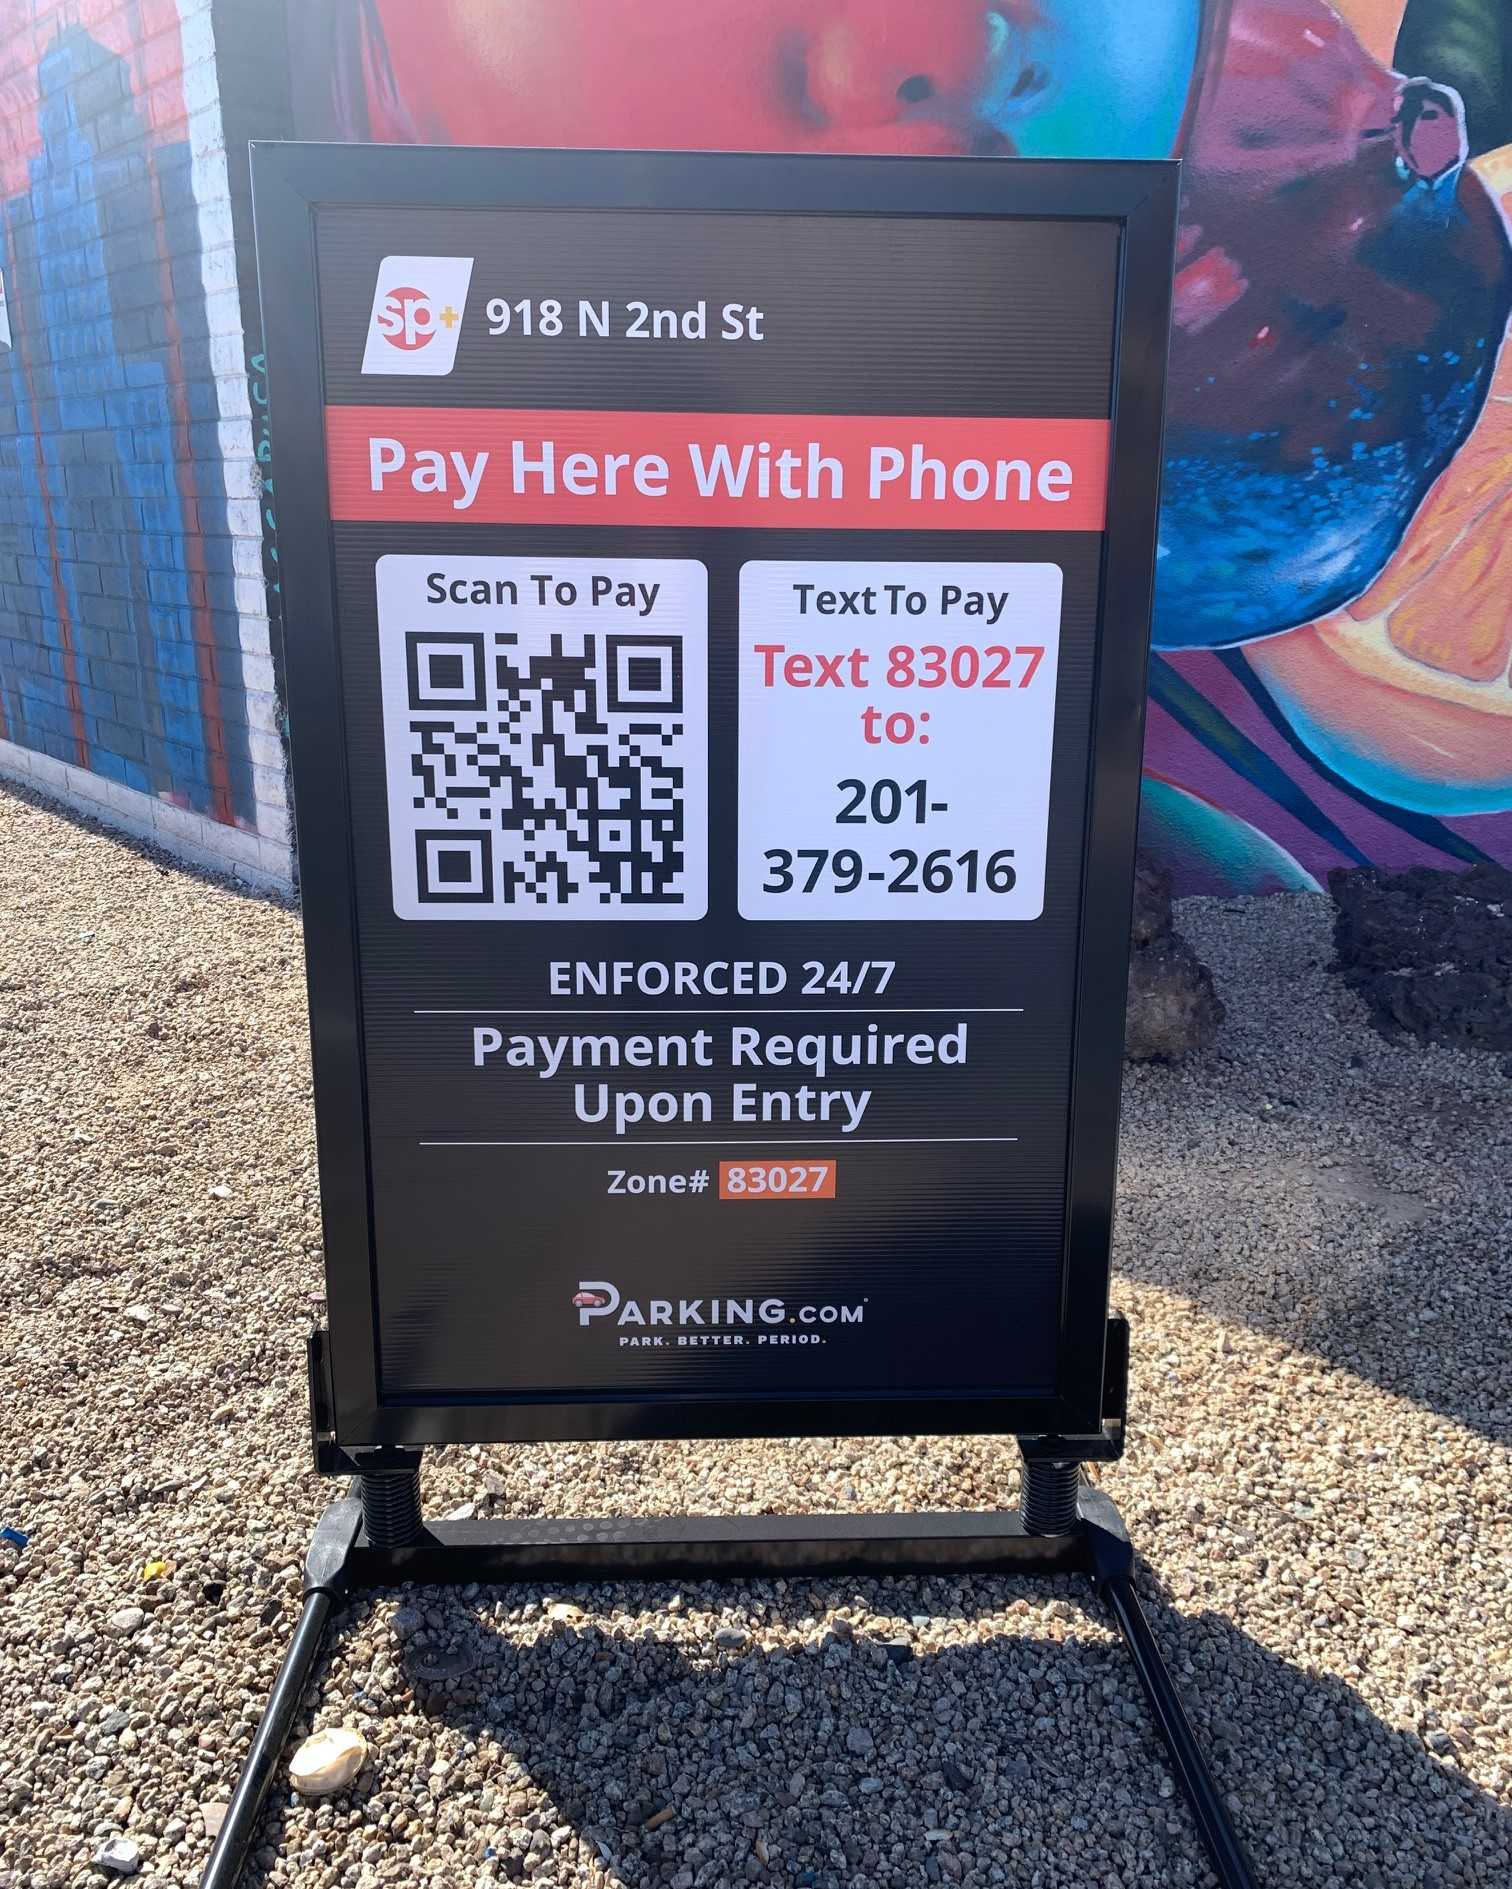 Pay Here With Phone